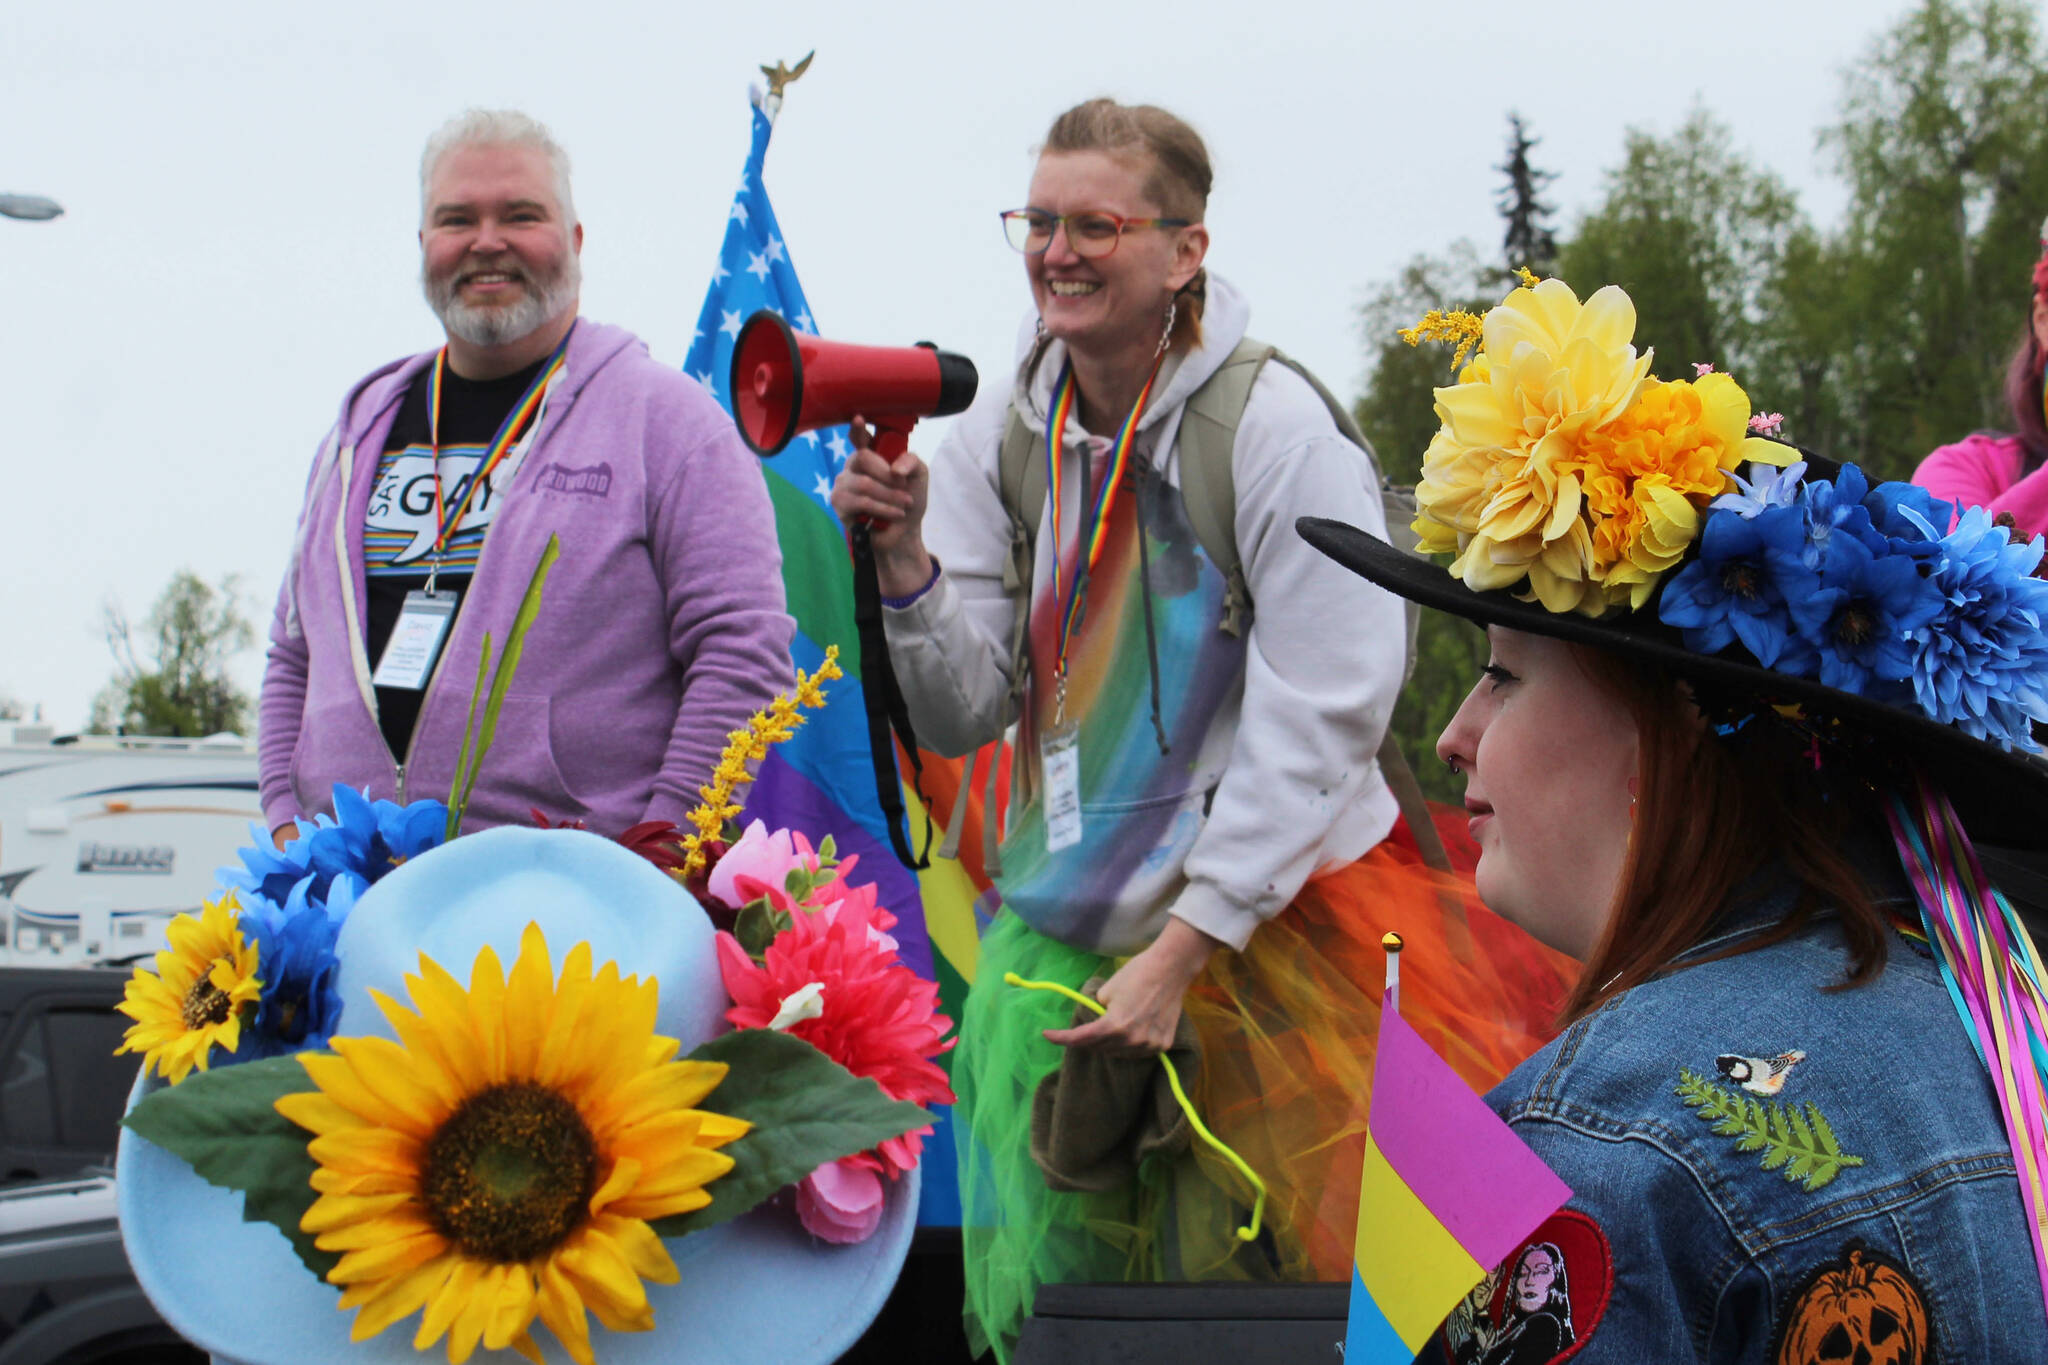 David Brighton (left) and Leslie Byrd (right) prepare to lead marchers from the Soldotna Regional Sports Complex to Soldotna Creek Park as part of Soldotna Pride in the Park on Saturday, June 3, 2023 in Soldotna, Alaska. (Ashlyn O’Hara/Peninsula Clarion)